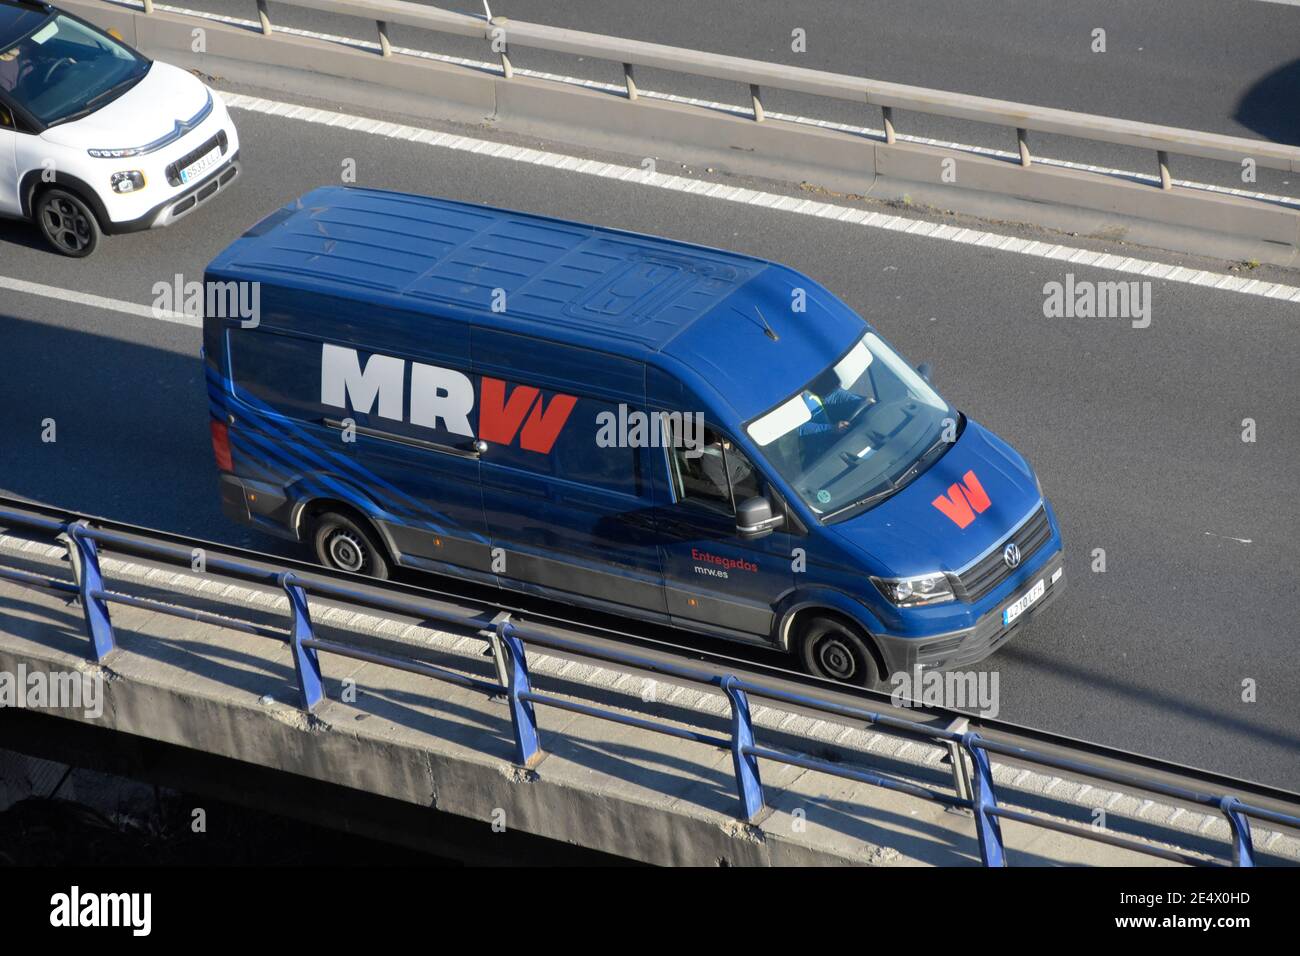 MRW fast delivery van in a highway. Barcelona, Catalonia, Spain. Stock Photo